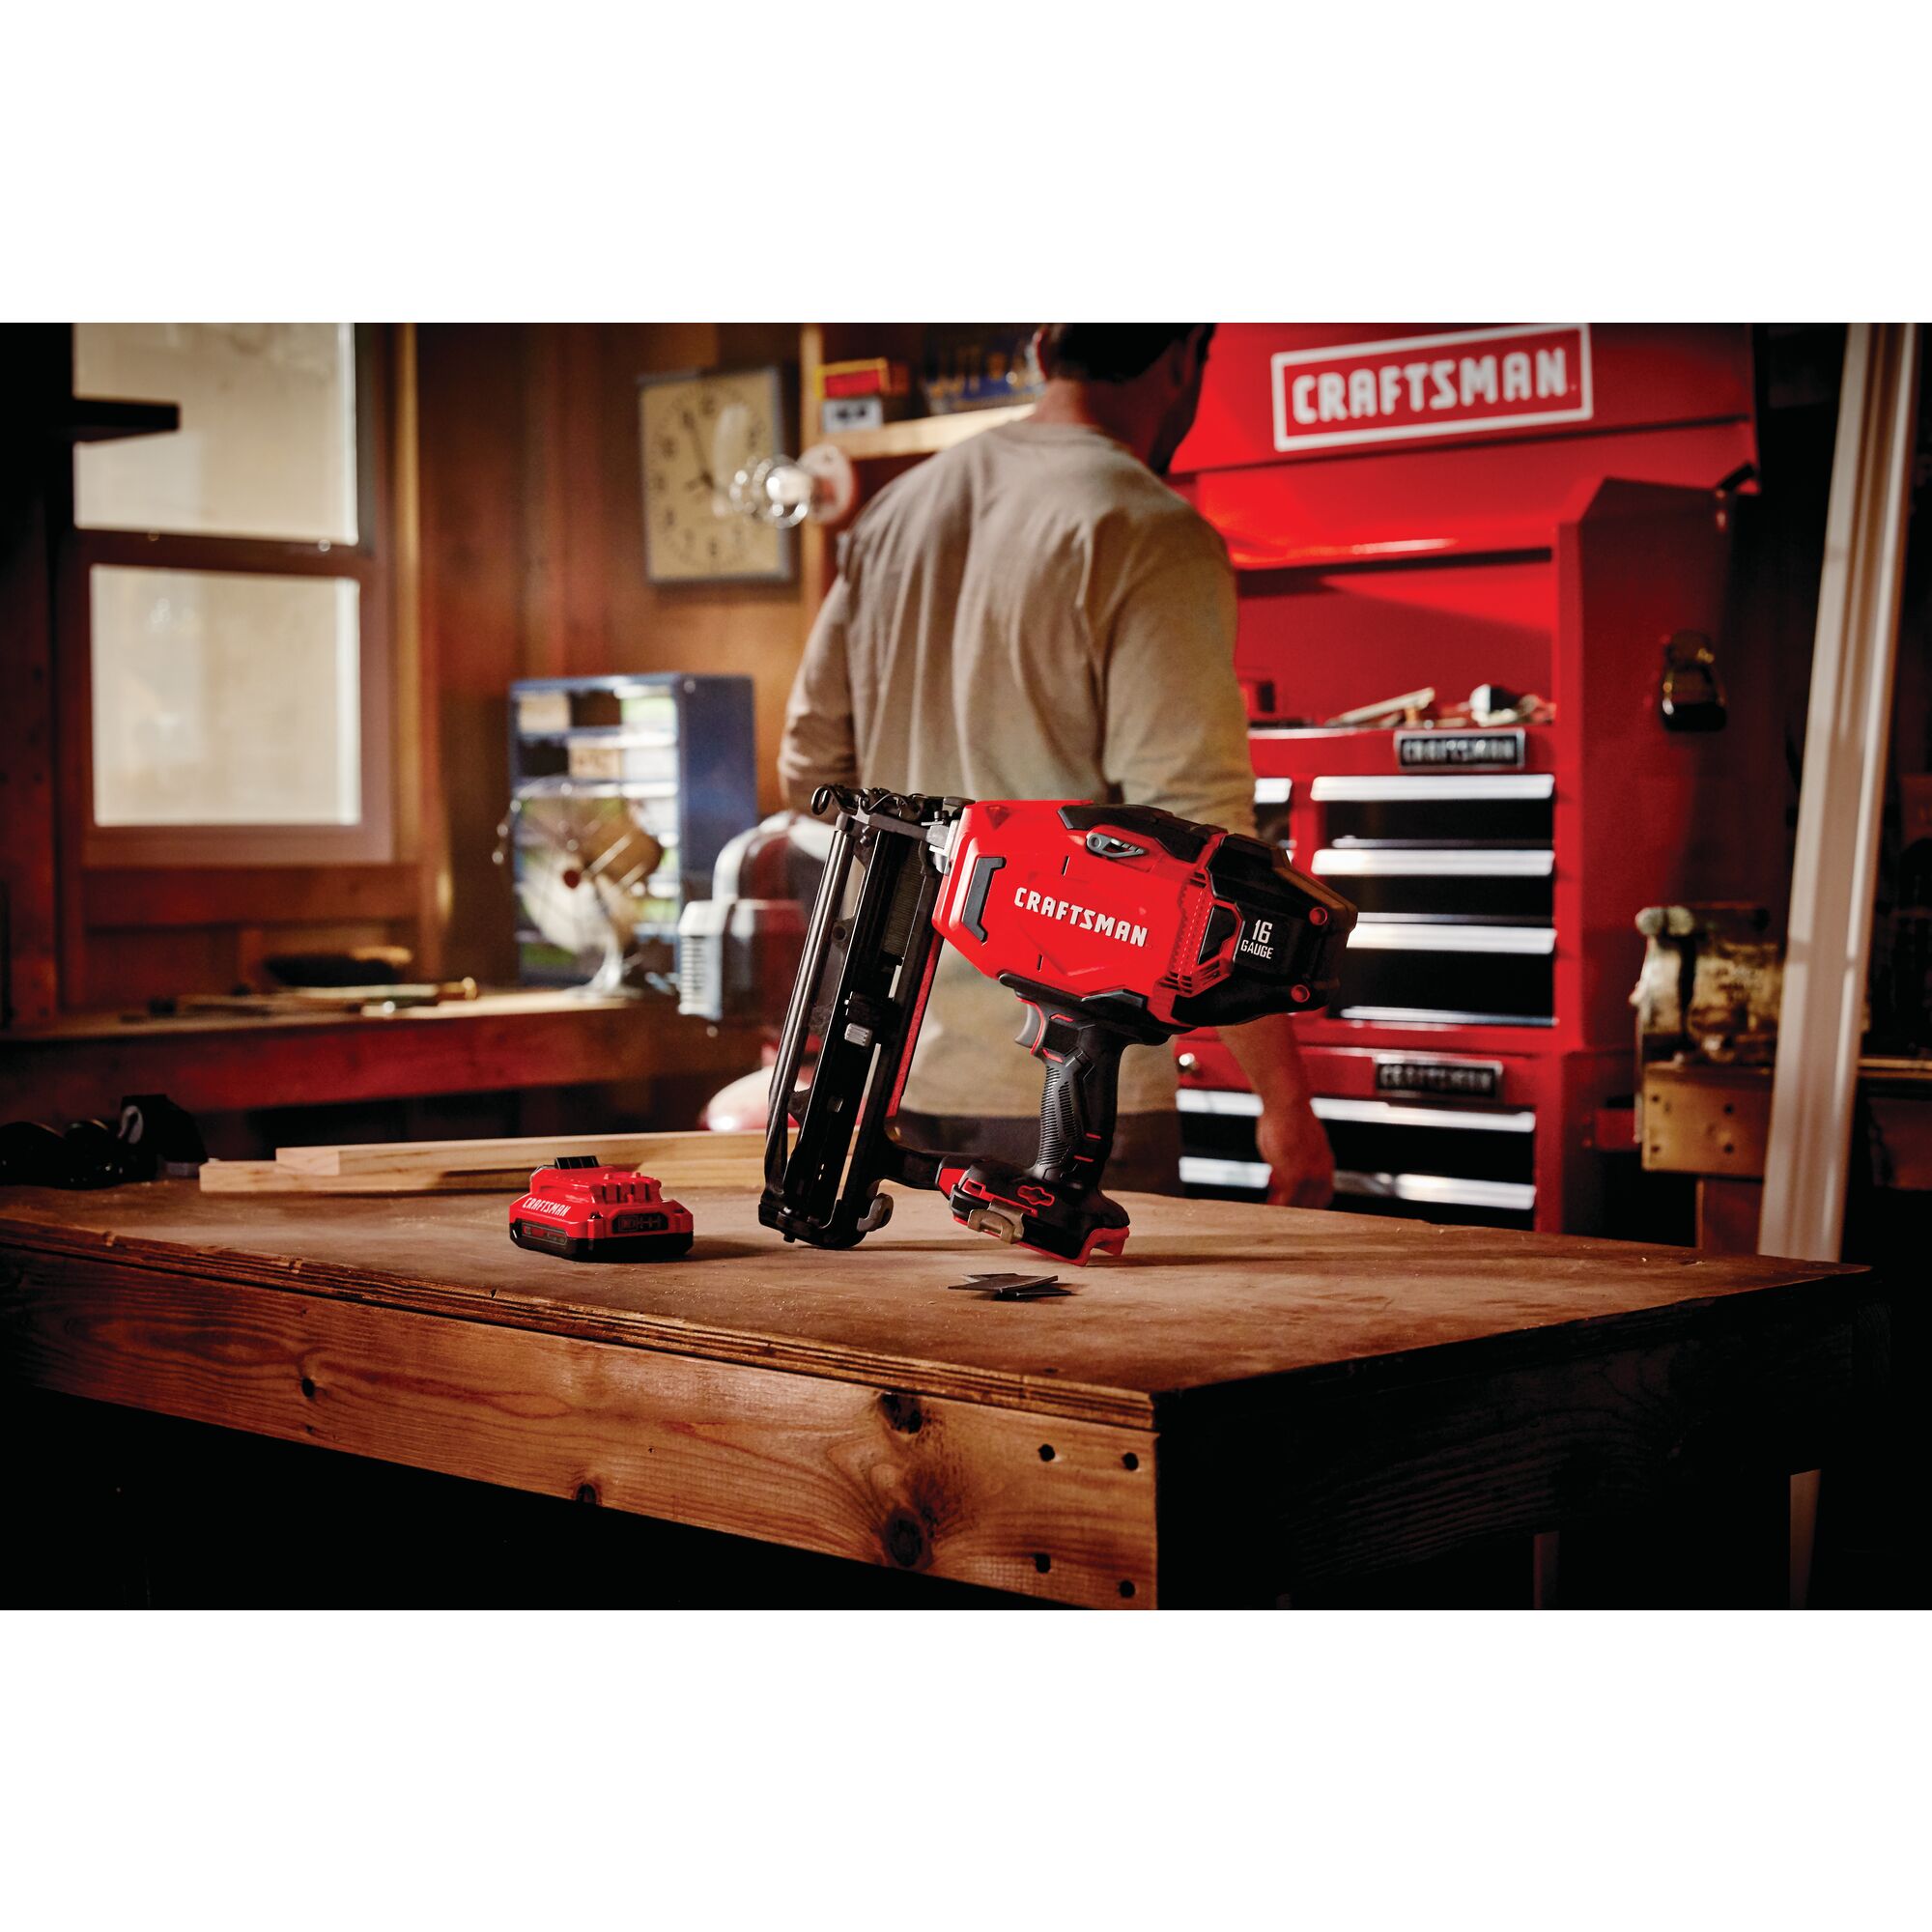 20 volt cordless 16 gauge finish nailer kit placed on a wooden table at a work station.